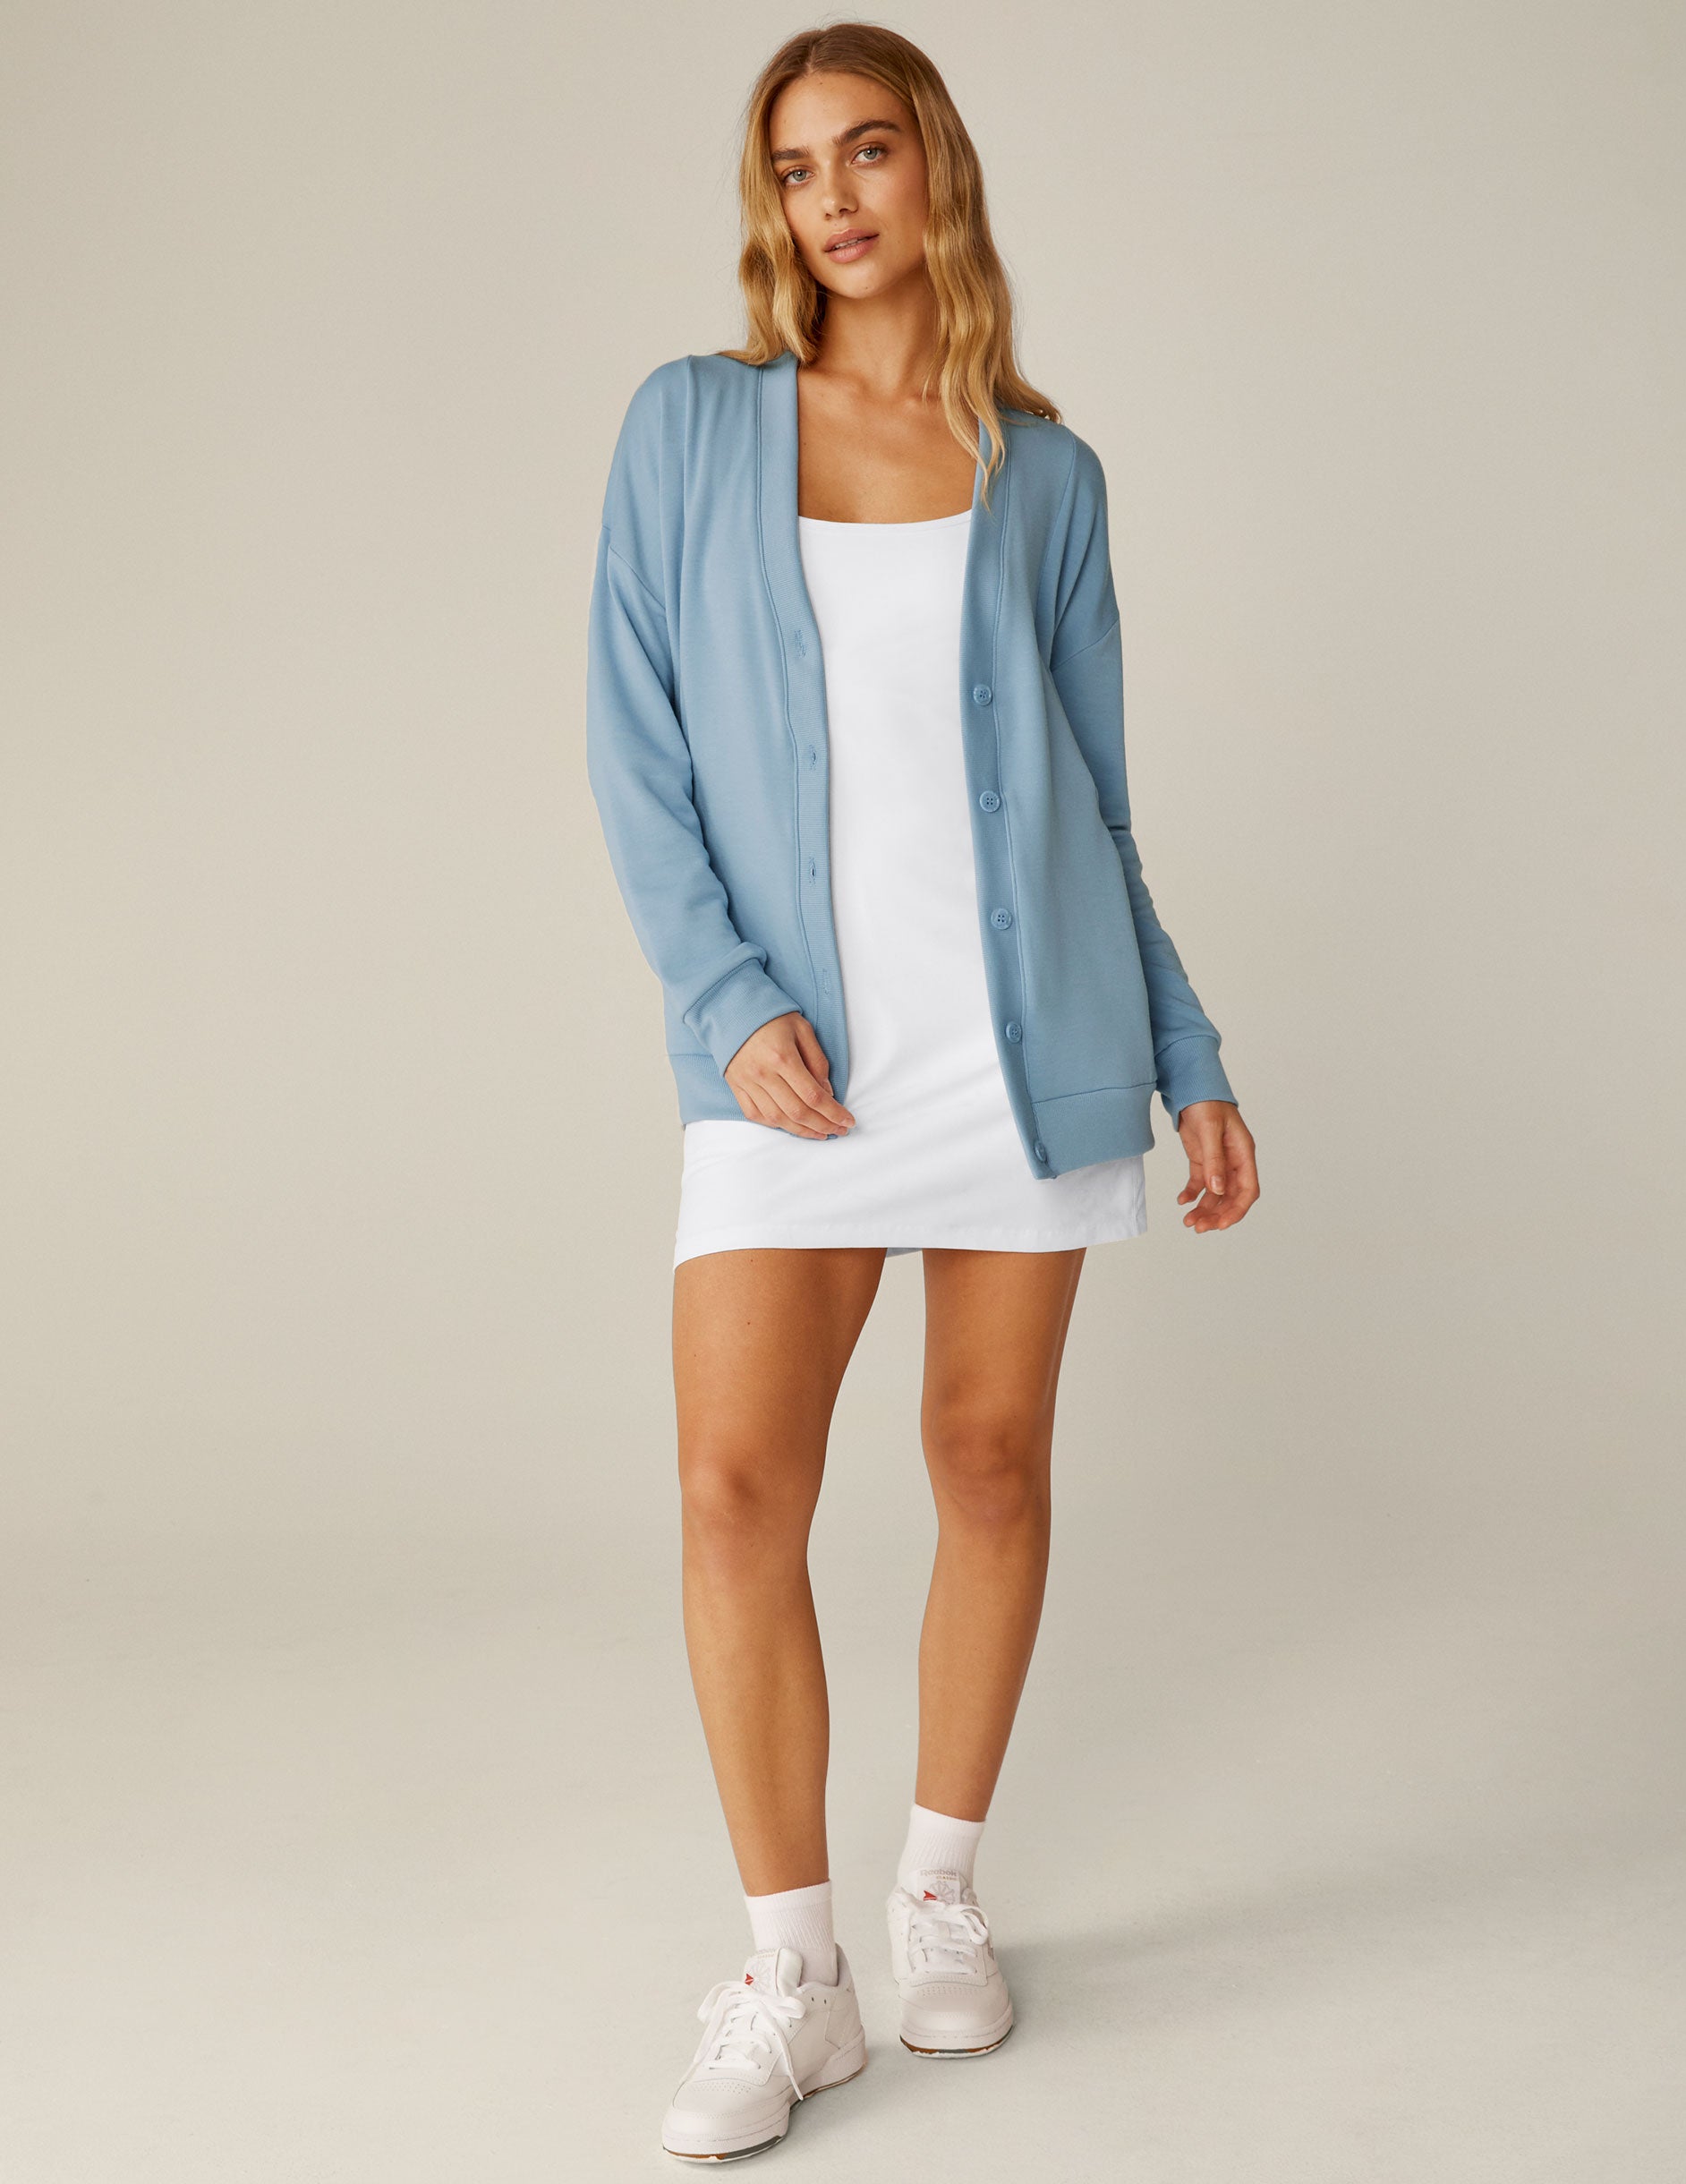 blue button up cardigan top. 